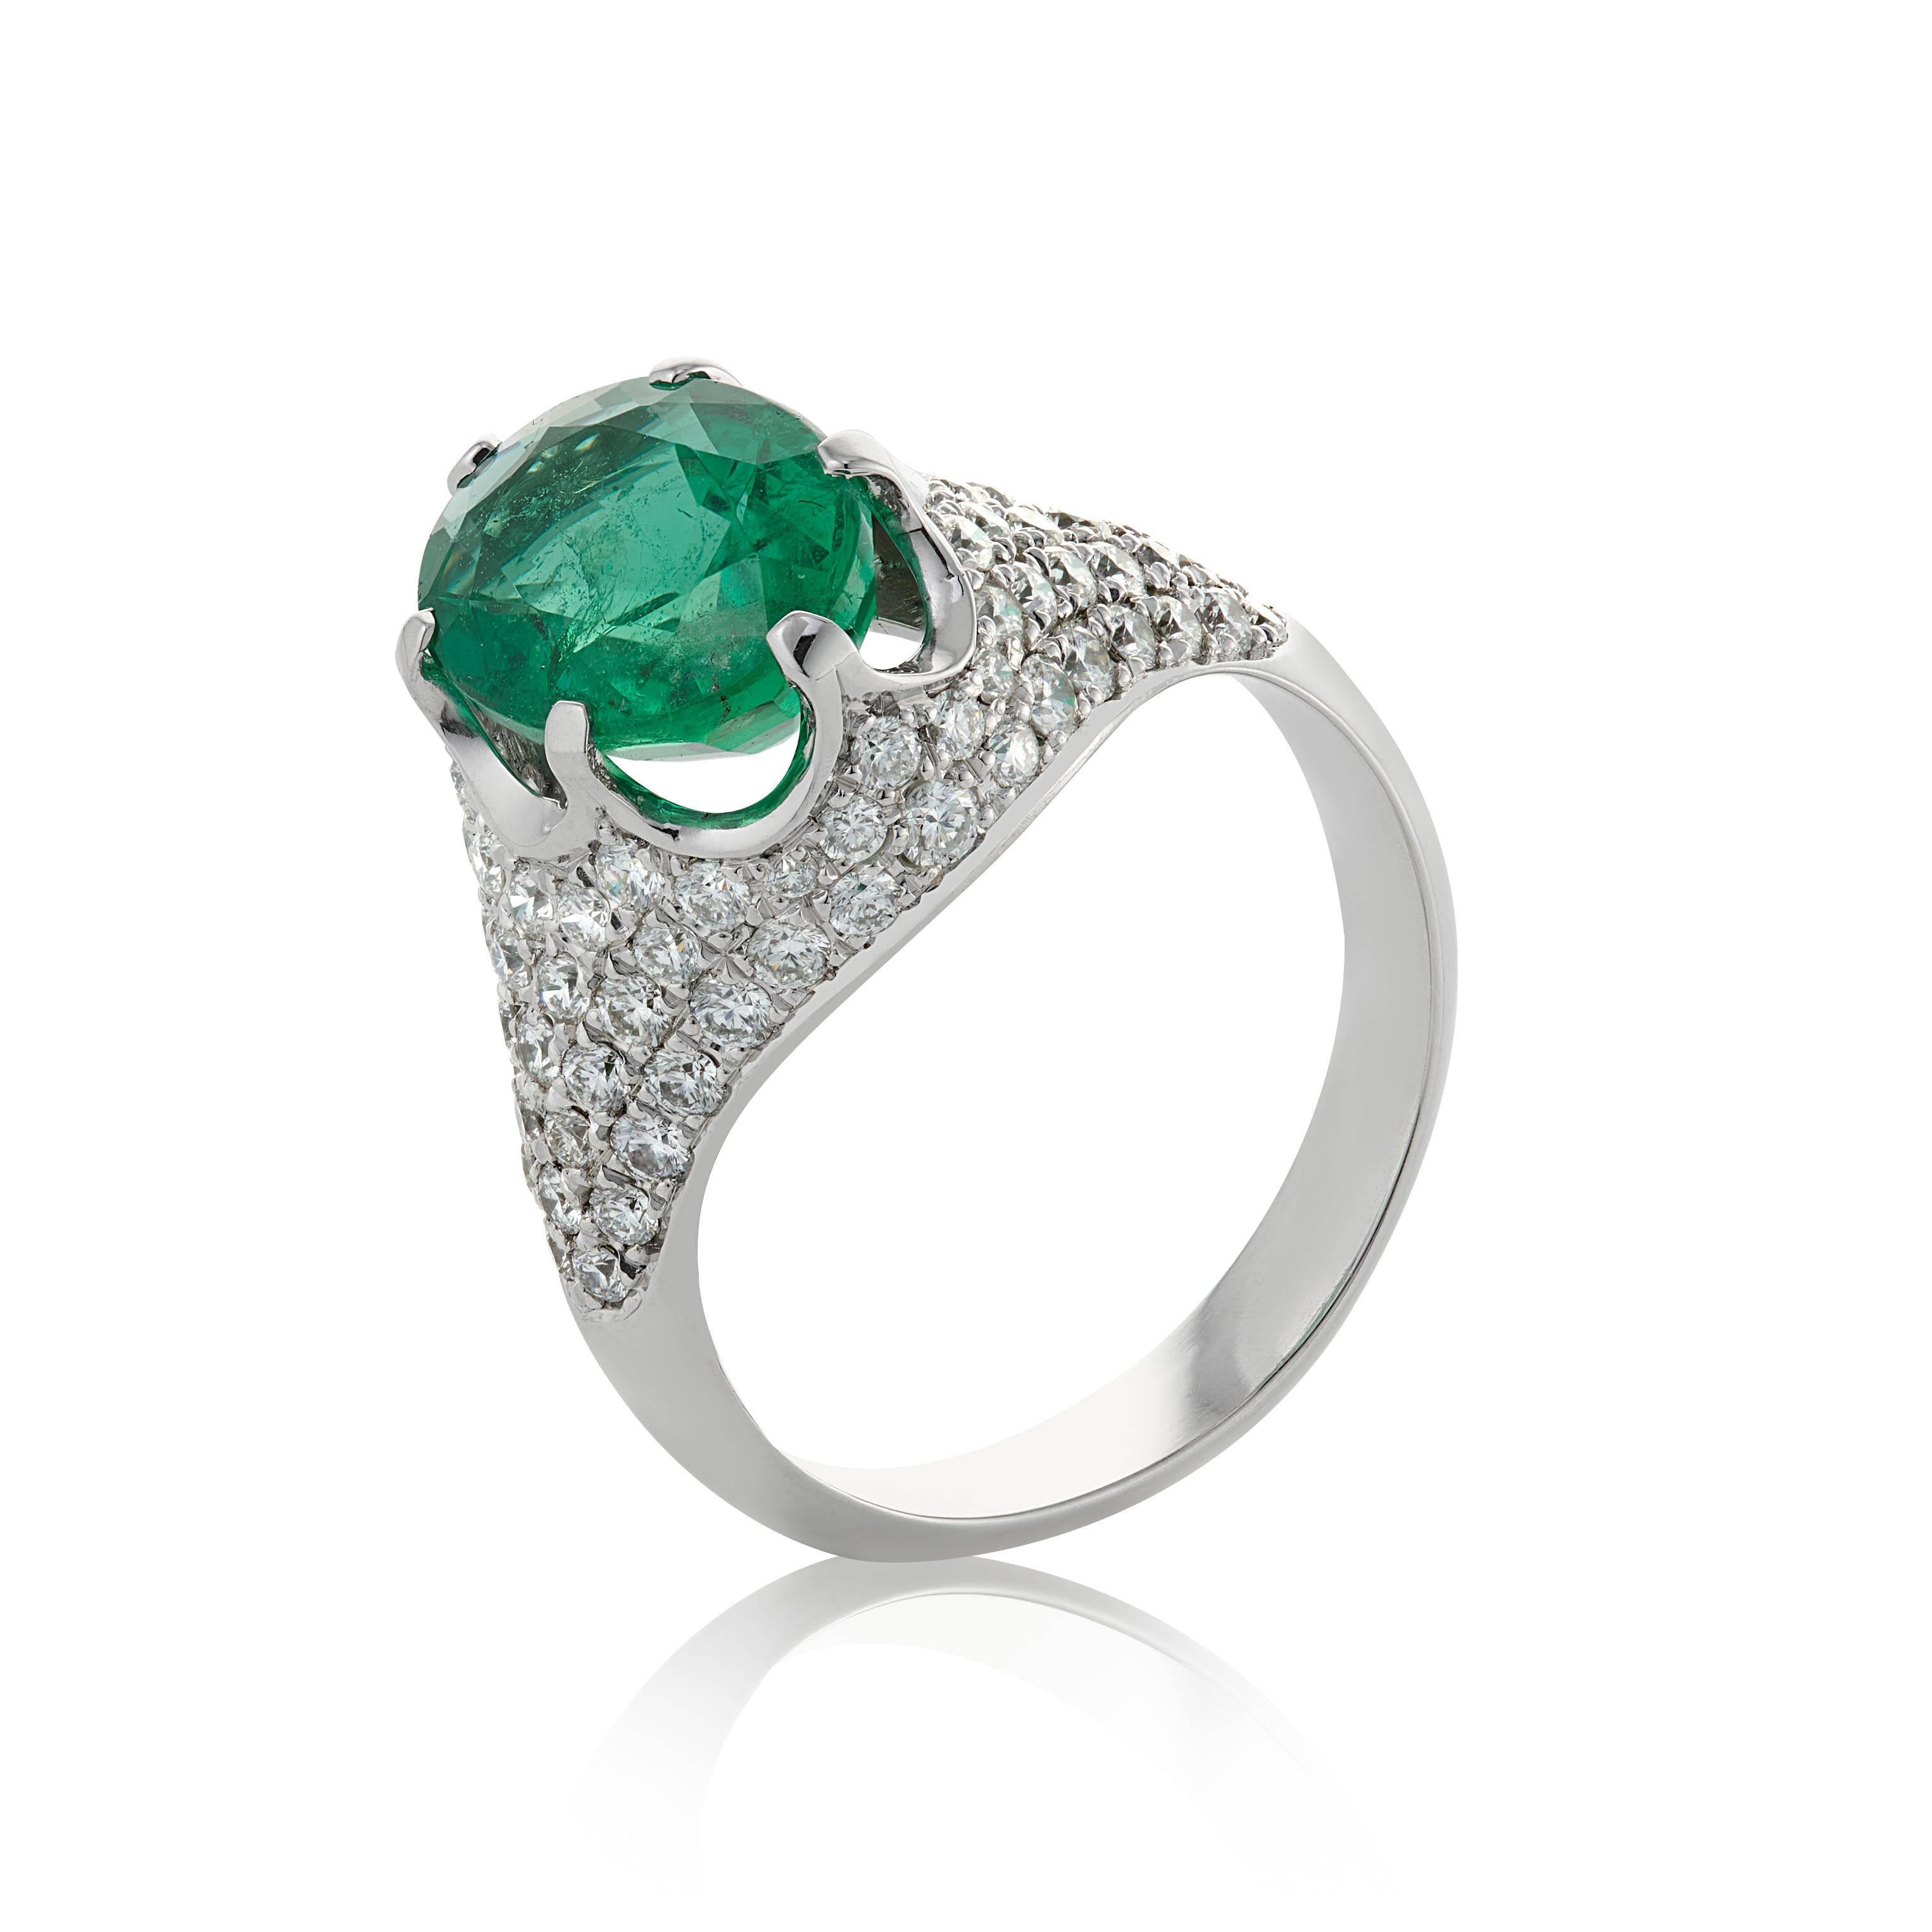 E Wolfe & Co Handmade 18ct White Gold Emerald and Diamond Cocktail Ring. The oval-cut emerald centre stone weighs 2.95 carats, is a pleasing stone and is surrounded by .92 carats of G colour and VS clarity round brilliant-cut diamonds set in pave